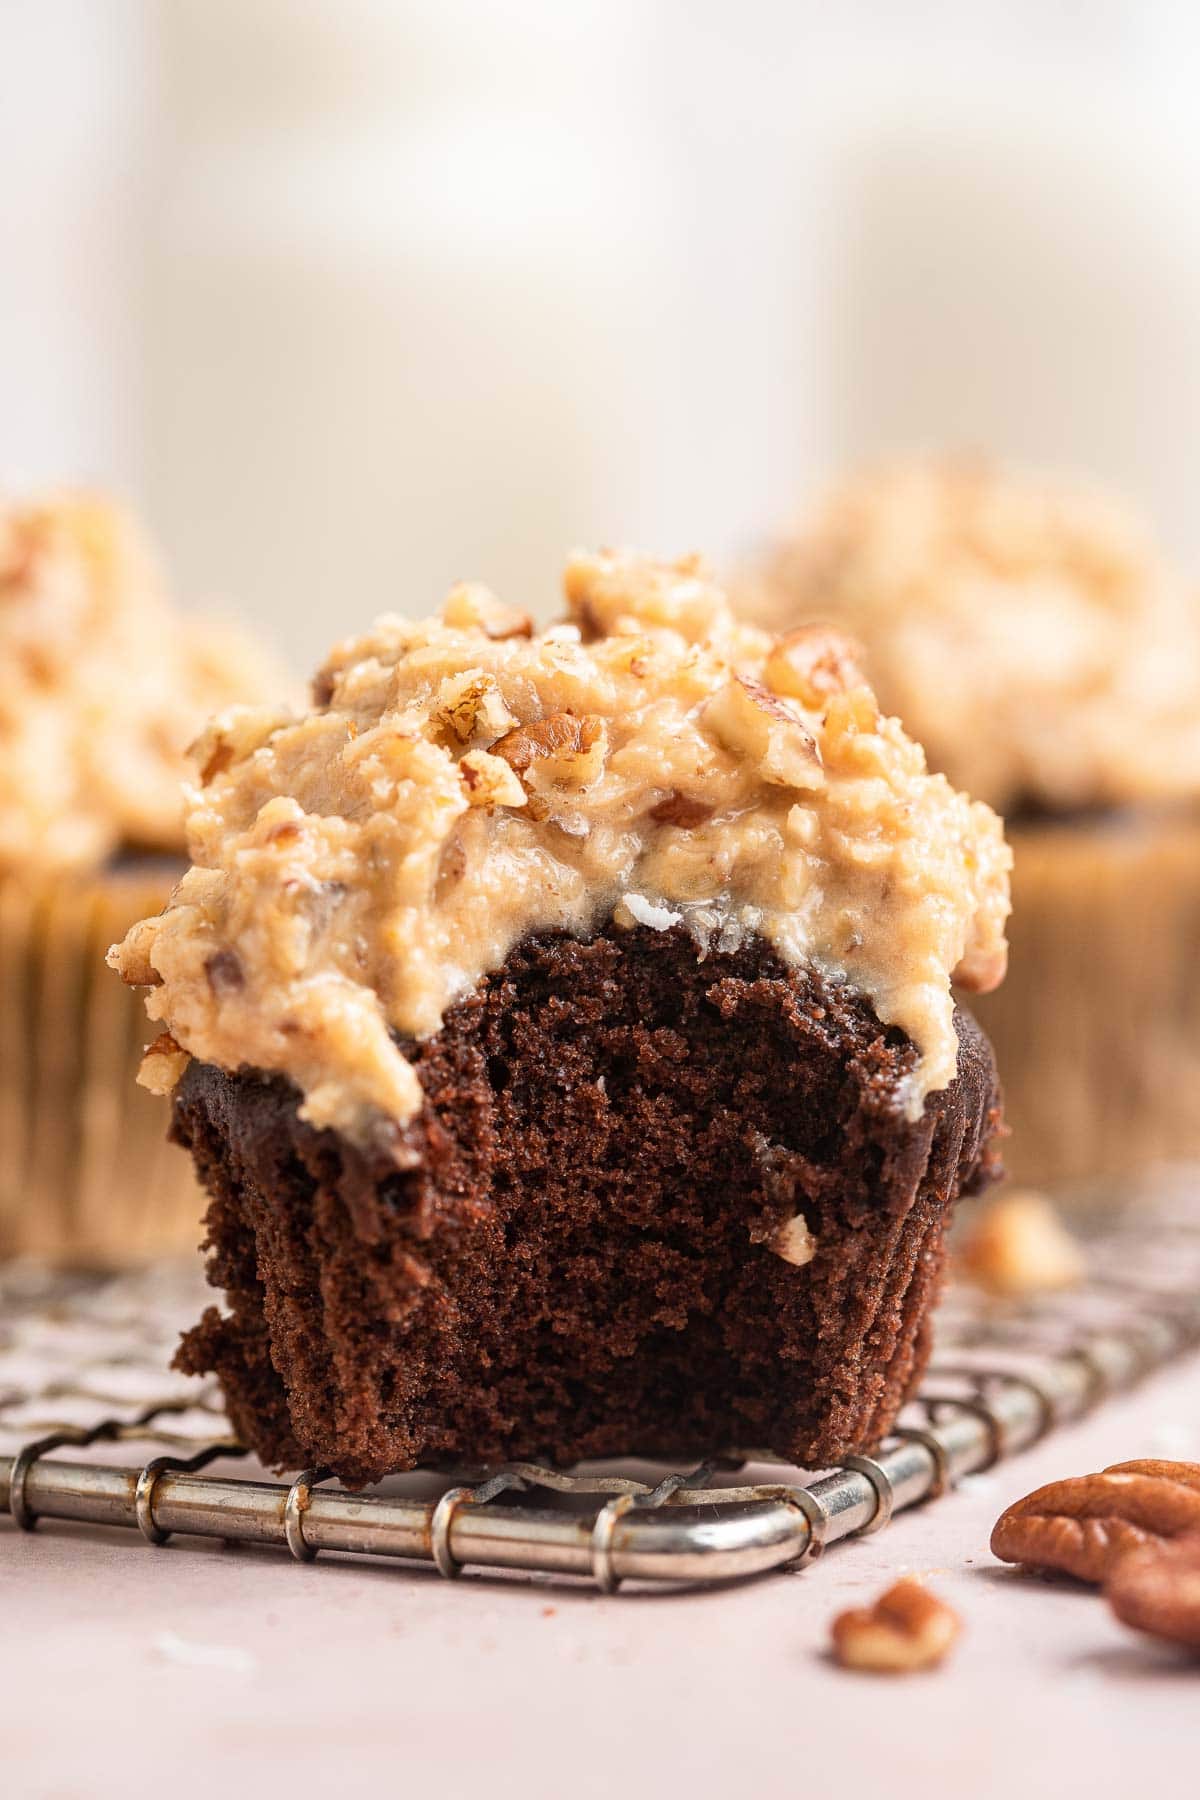 Single chocolate cupcake with creamy brown frosting with pecans.